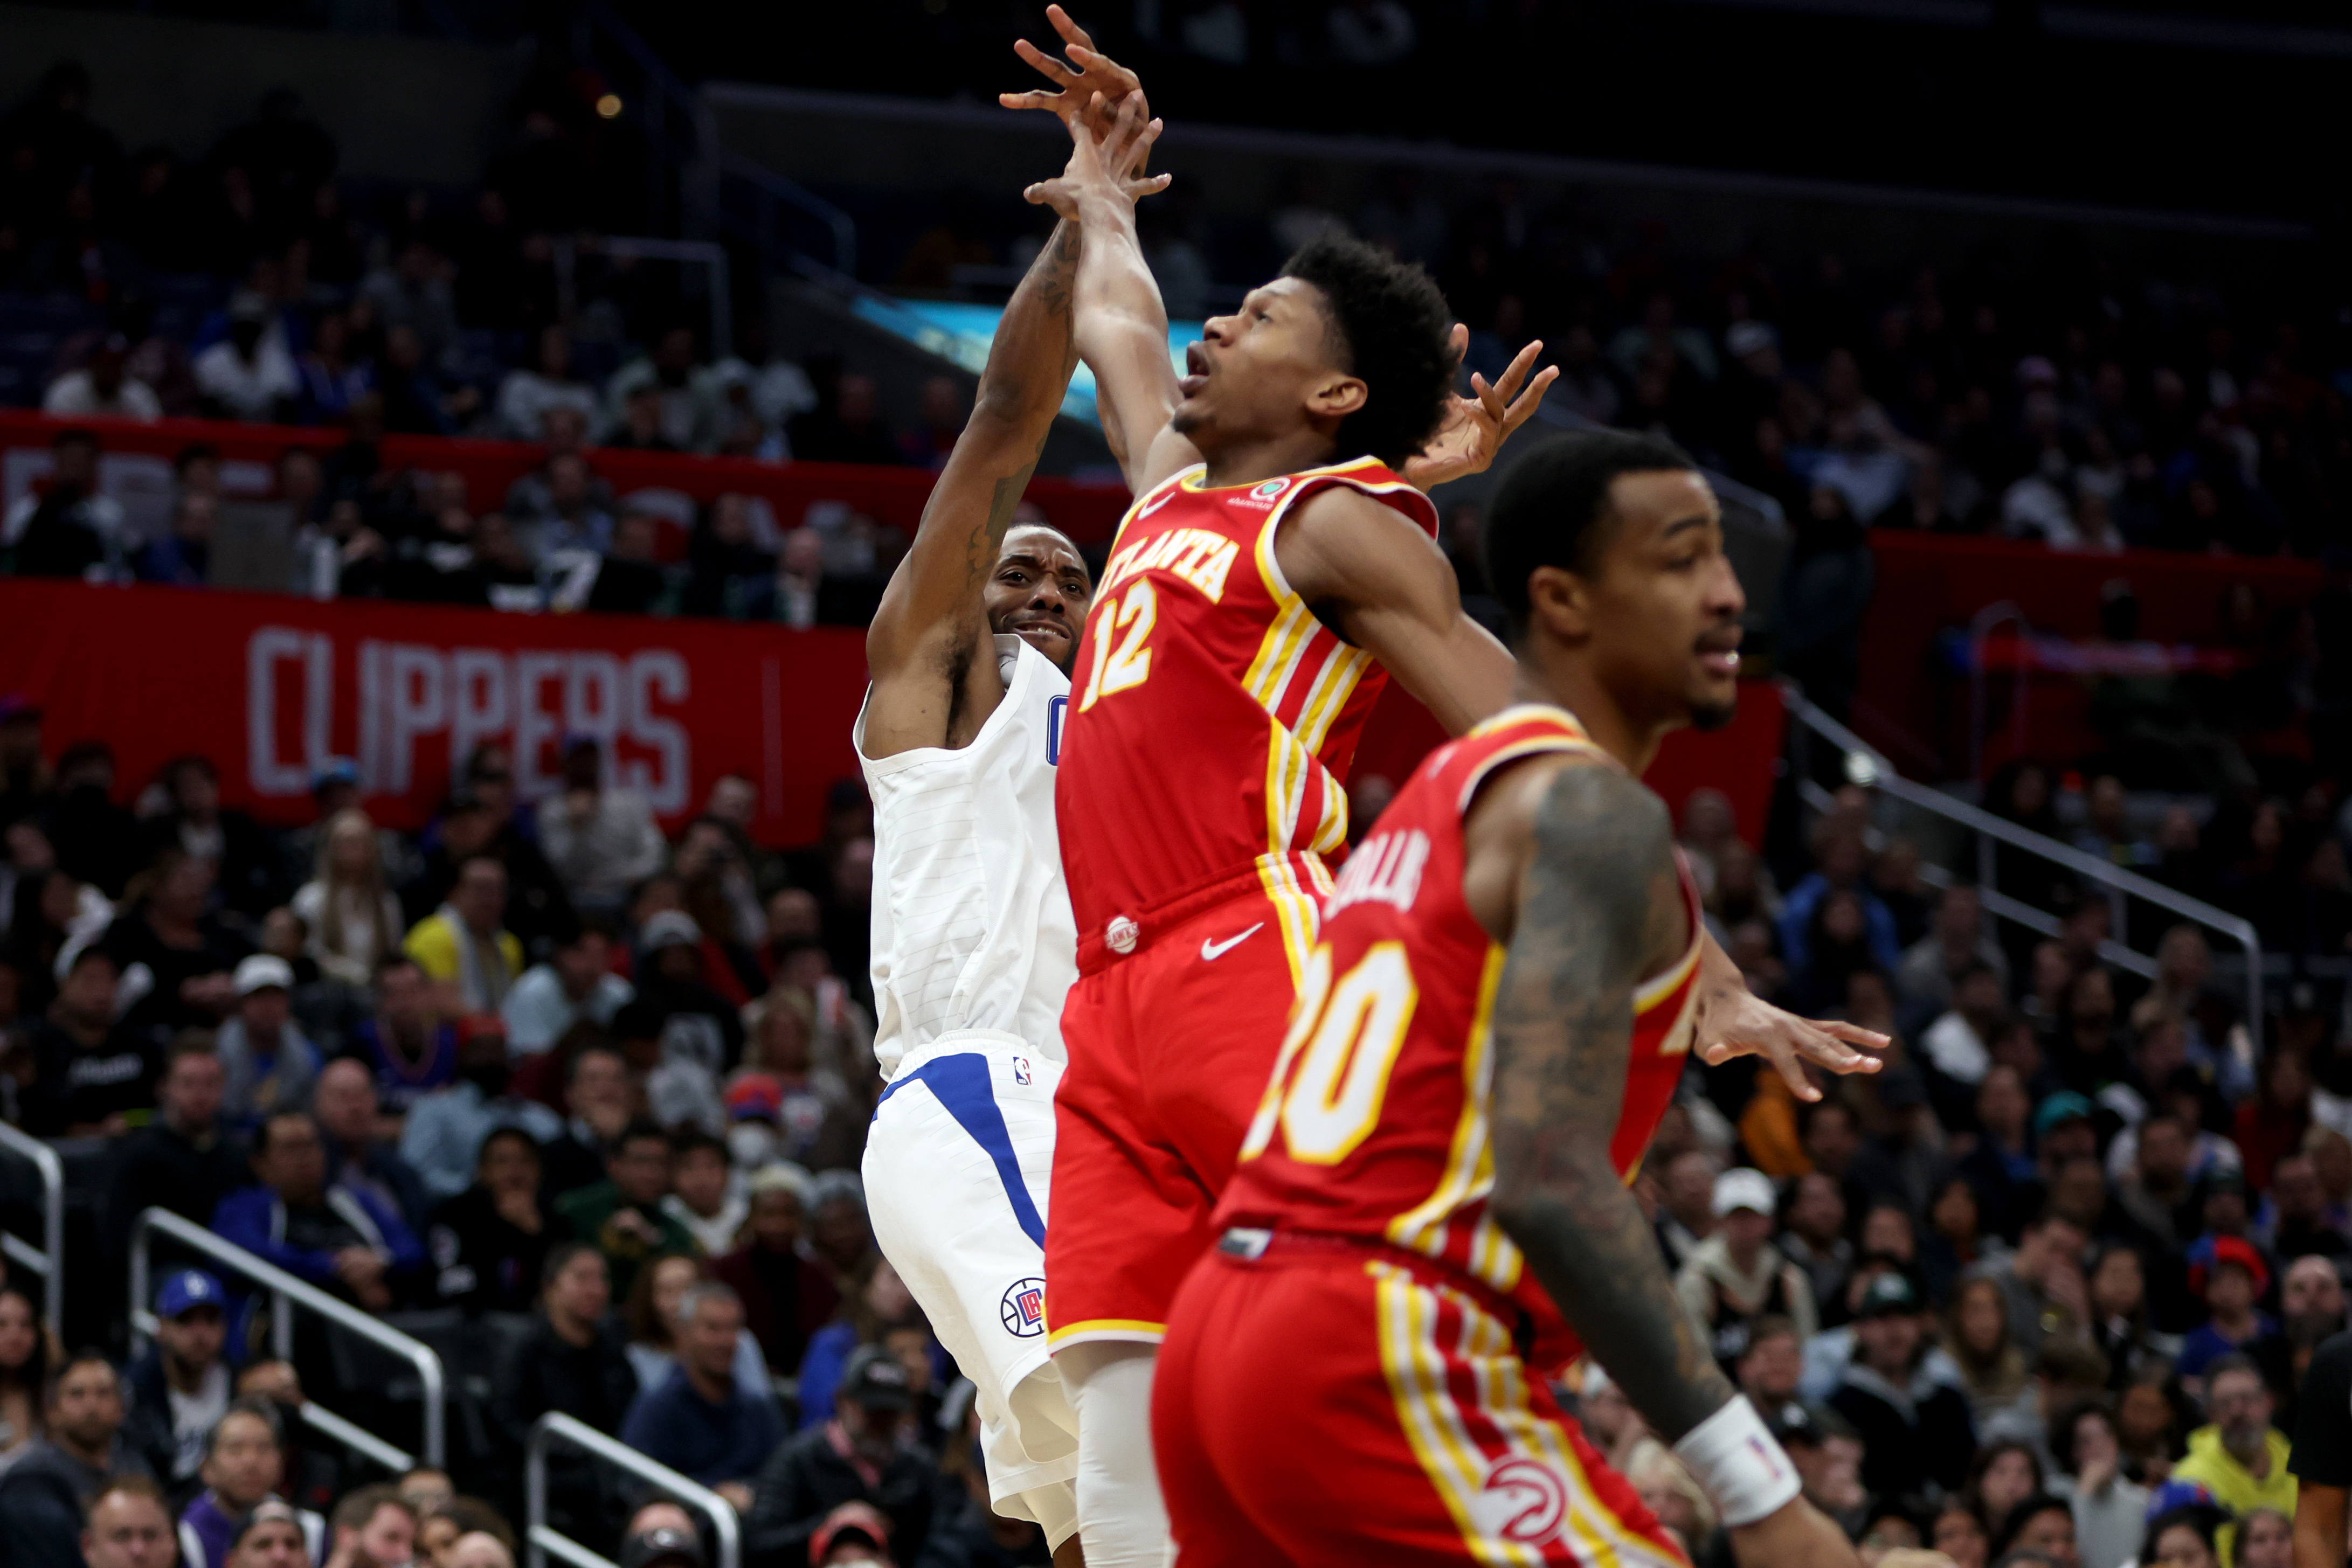 NBA Admits Crucial Missed Call in Clippers vs. Hawks Game